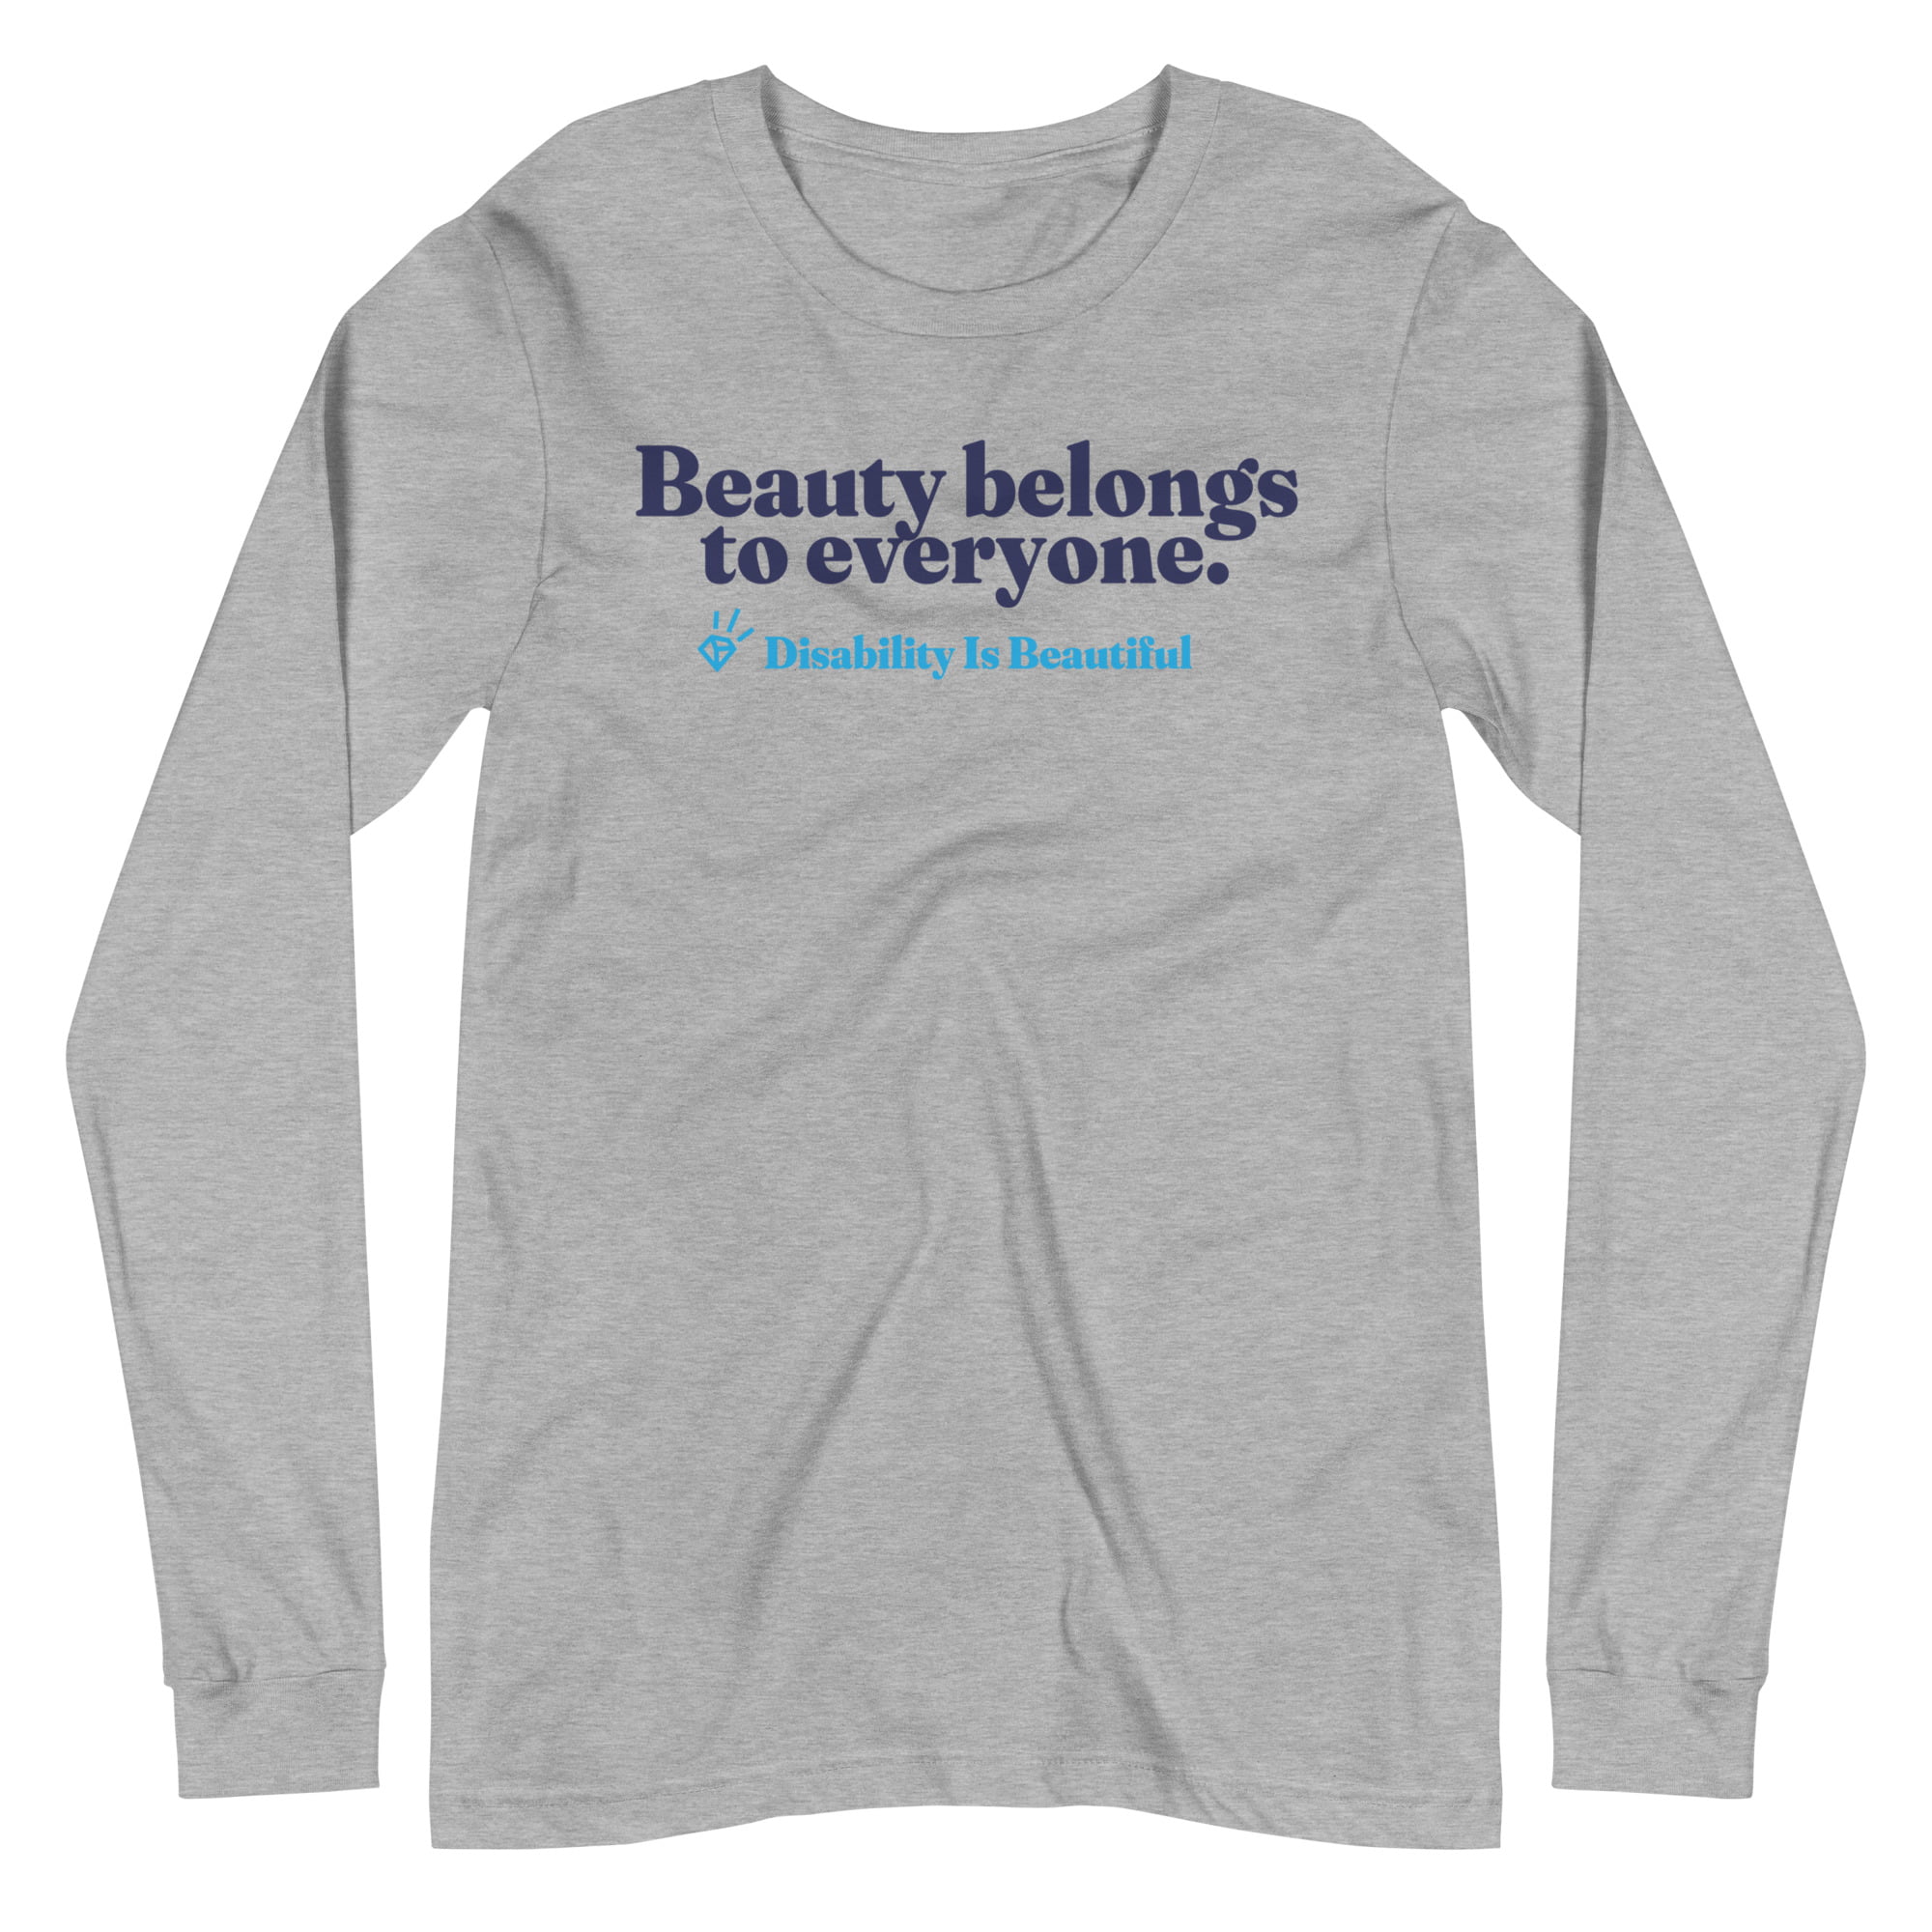 Product image for Disability is Beautiful Long Sleeve Tee